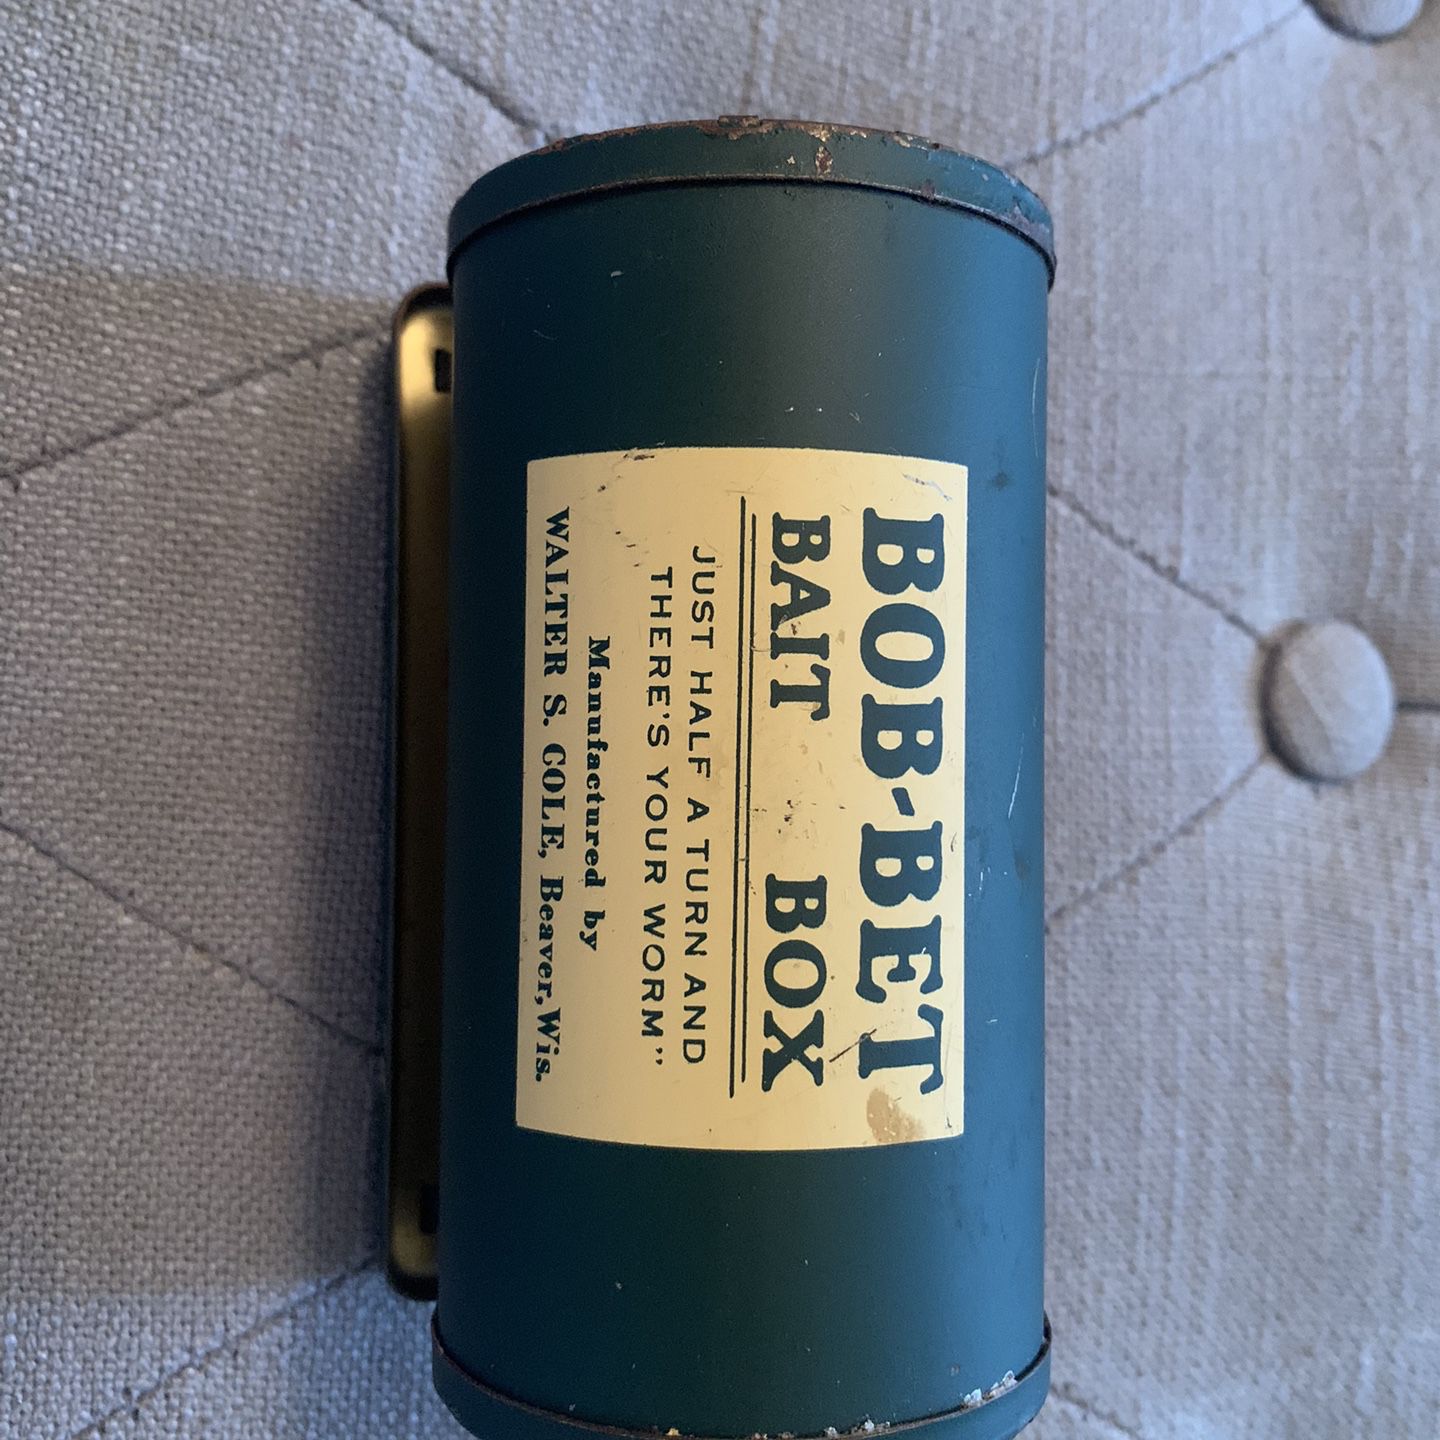 Antique Bob-Bet Bait Box for Sale in Vancouver, WA - OfferUp